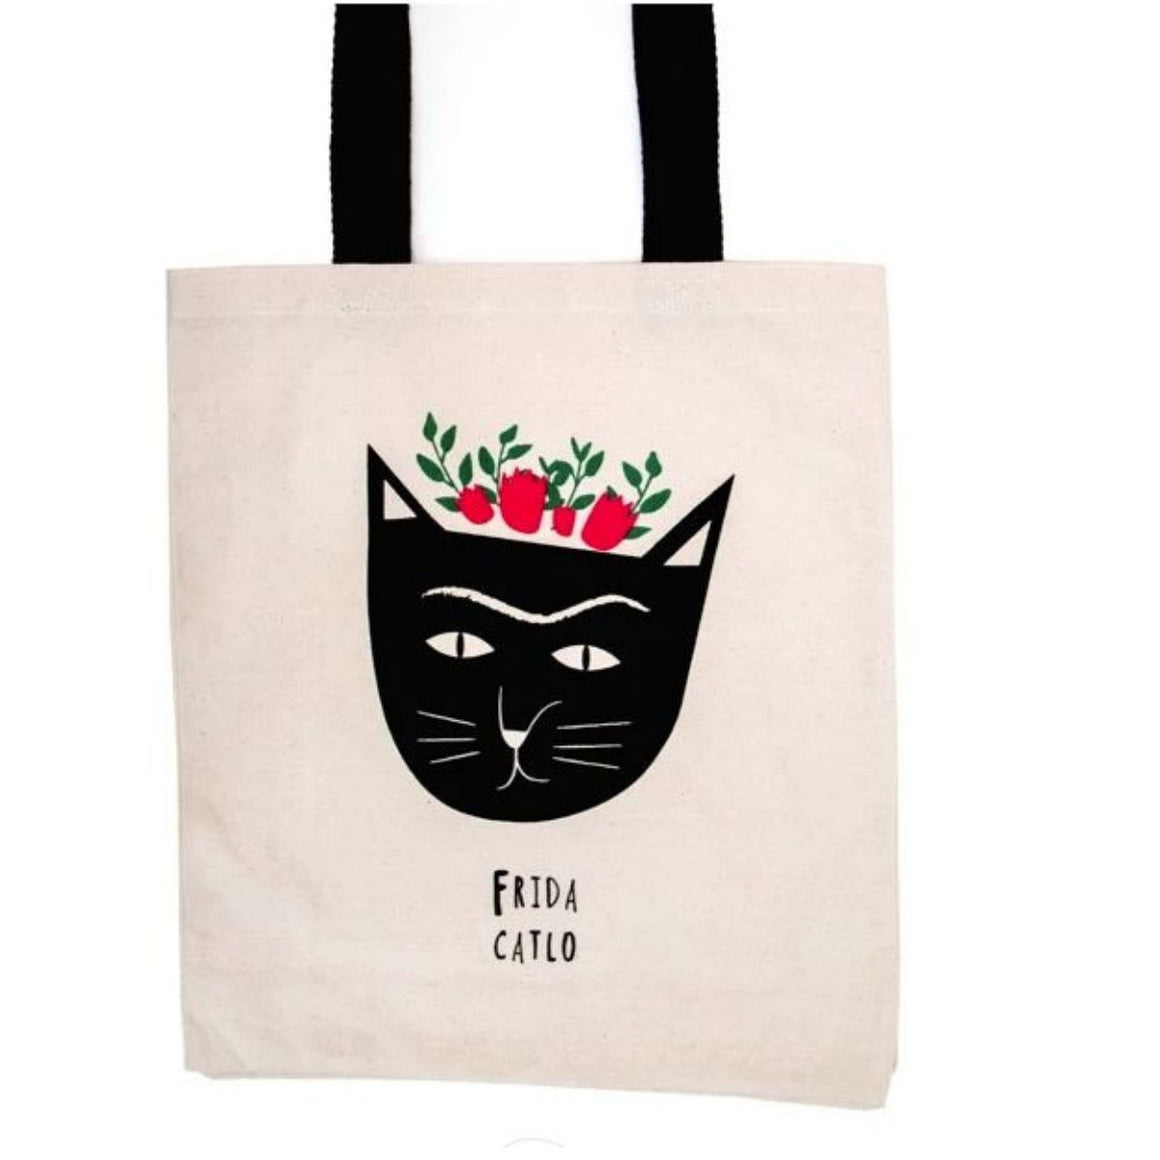 Image featuring the tote bag product in the centre with a graphically illustrated cat icon which has flower above it's head to reflect a feline representation of frida kahlo